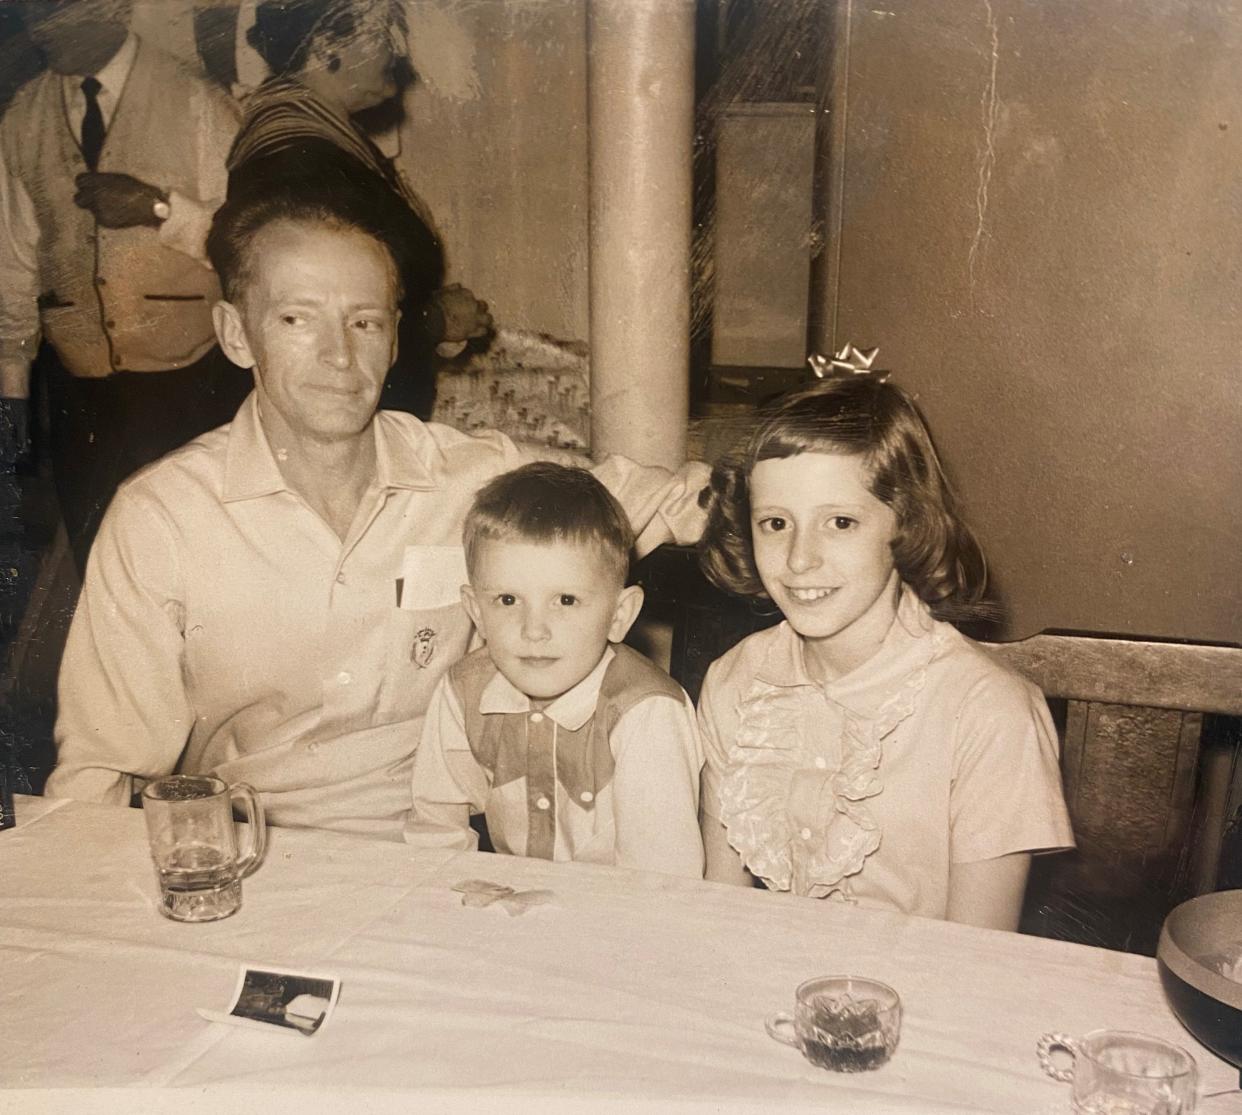 Freelance writer Jill Sell is pictured with her father, Charles F. Veleba, and little brother, Charles M. Veleba, in a photo taken during a holiday party at her aunt's home. Sell's father died when she was a freshman in college. He has battled the effects of polio most of his life. Sell's brother died a year ago from COVID-19.